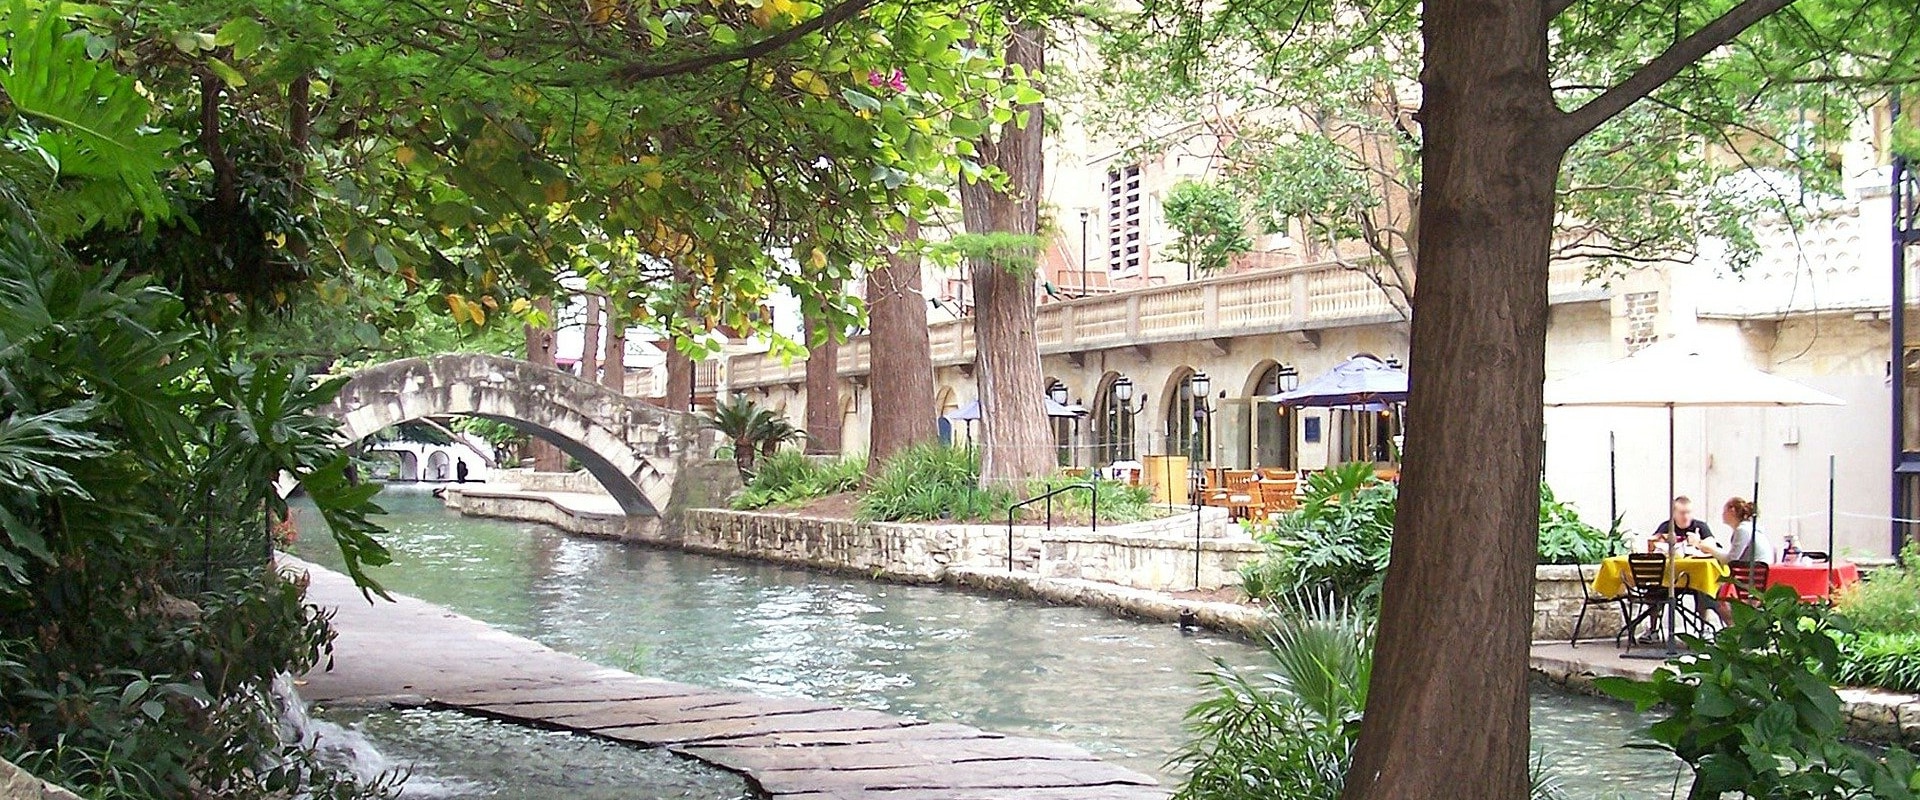 Is it expensive to live in san antonio?